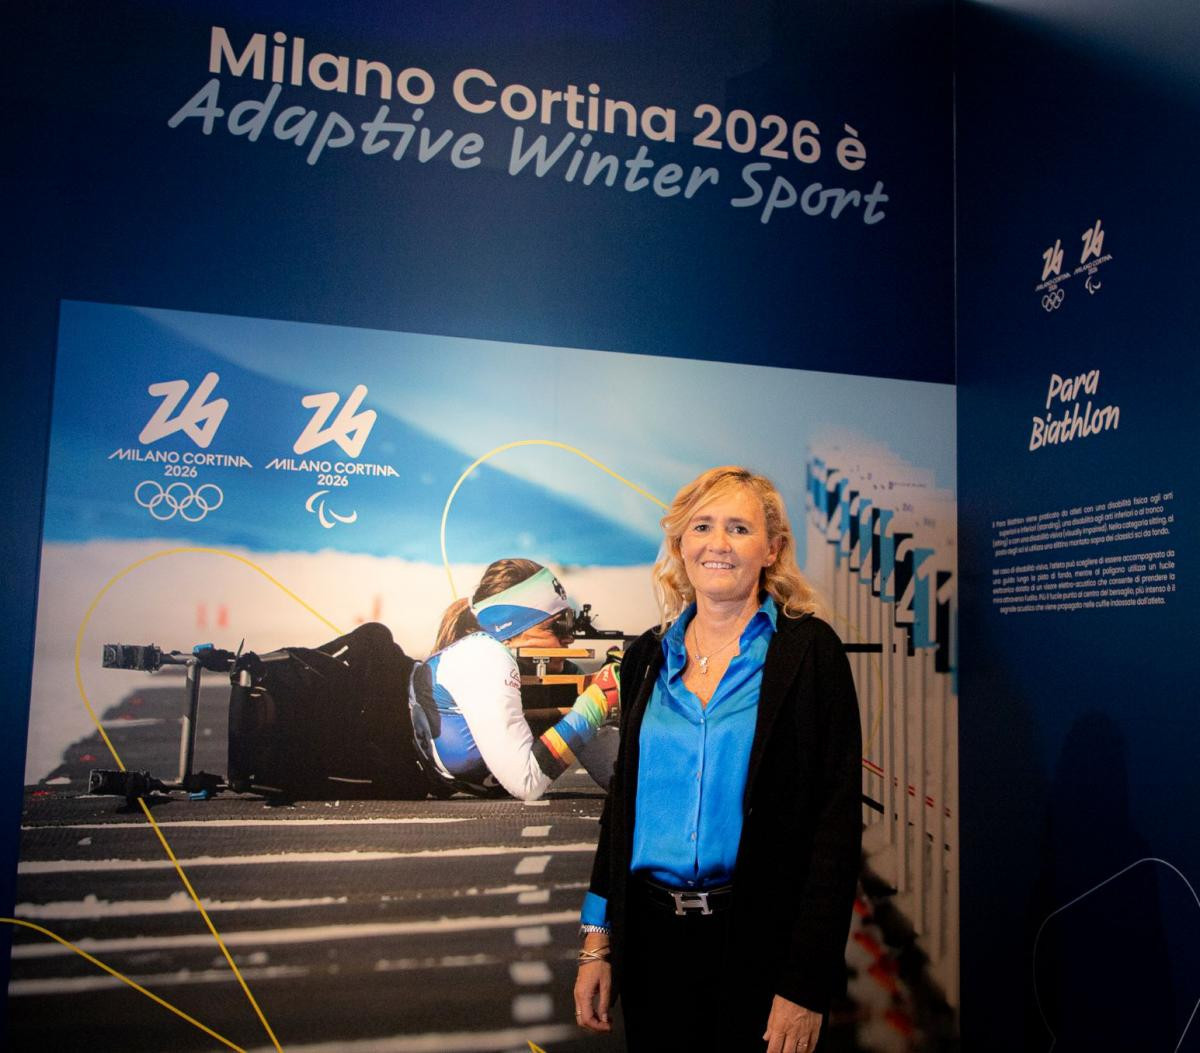 The four-year Adaptive Sport educational project is "a first concrete signal of the commitment of Milano Cortina 2026 to the inclusion and promotion of Paralympic values" according to Diana Bianchedi, Games project director of Milan Cortina 2026 ©Milan Cortina 2026 